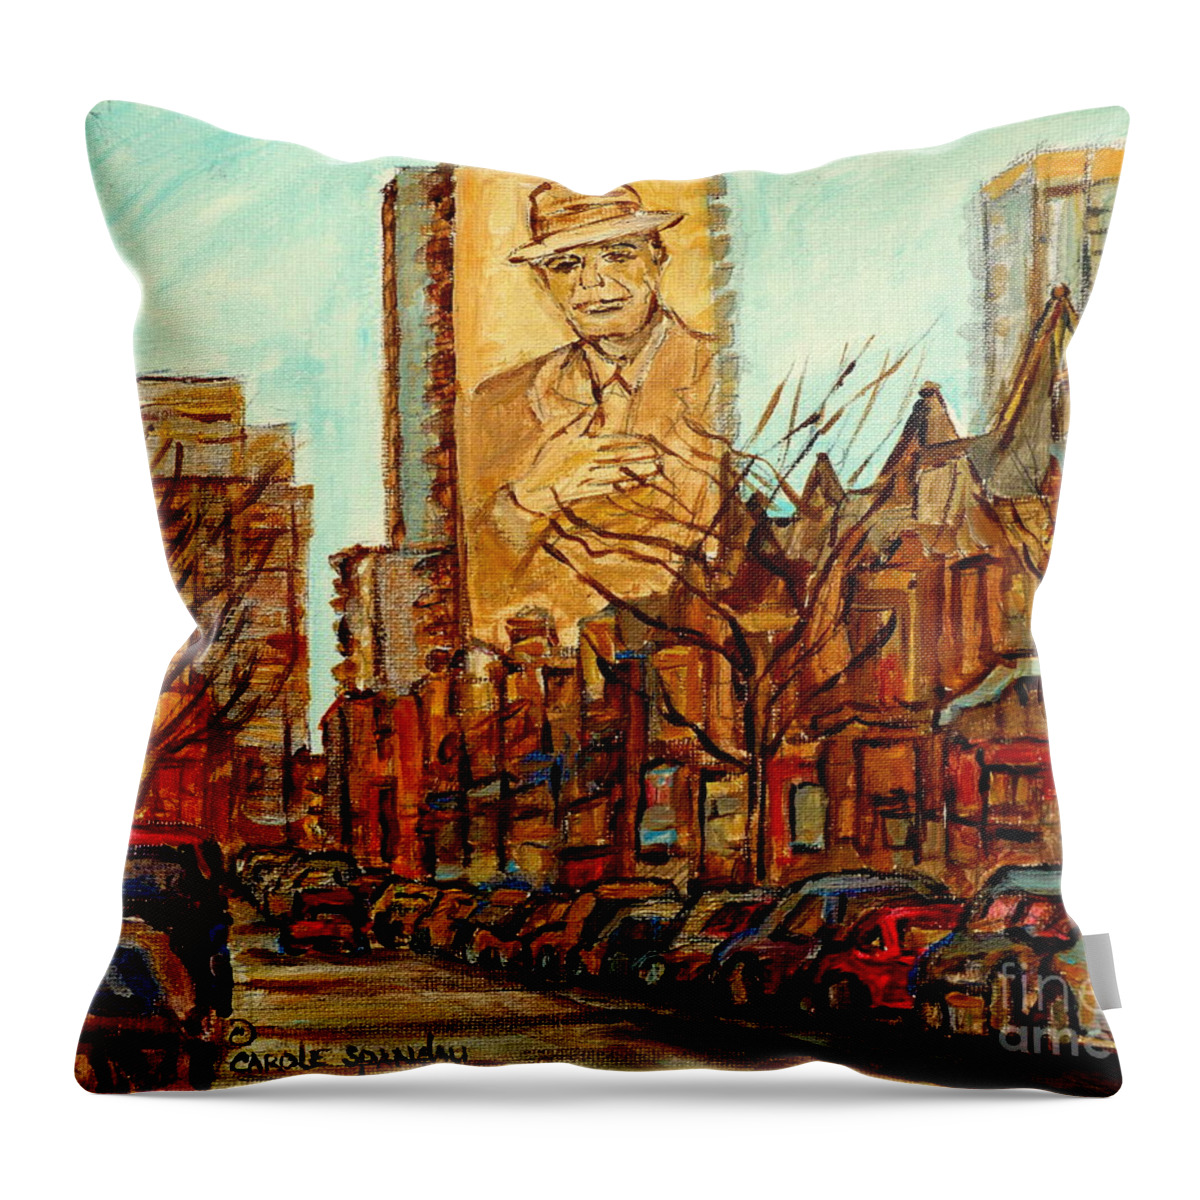 Montreal Throw Pillow featuring the painting Cohen Over Crescent St Downtown Montreal Streetscene Paintings Boutiques Bars And Cars C Spandau Art by Carole Spandau